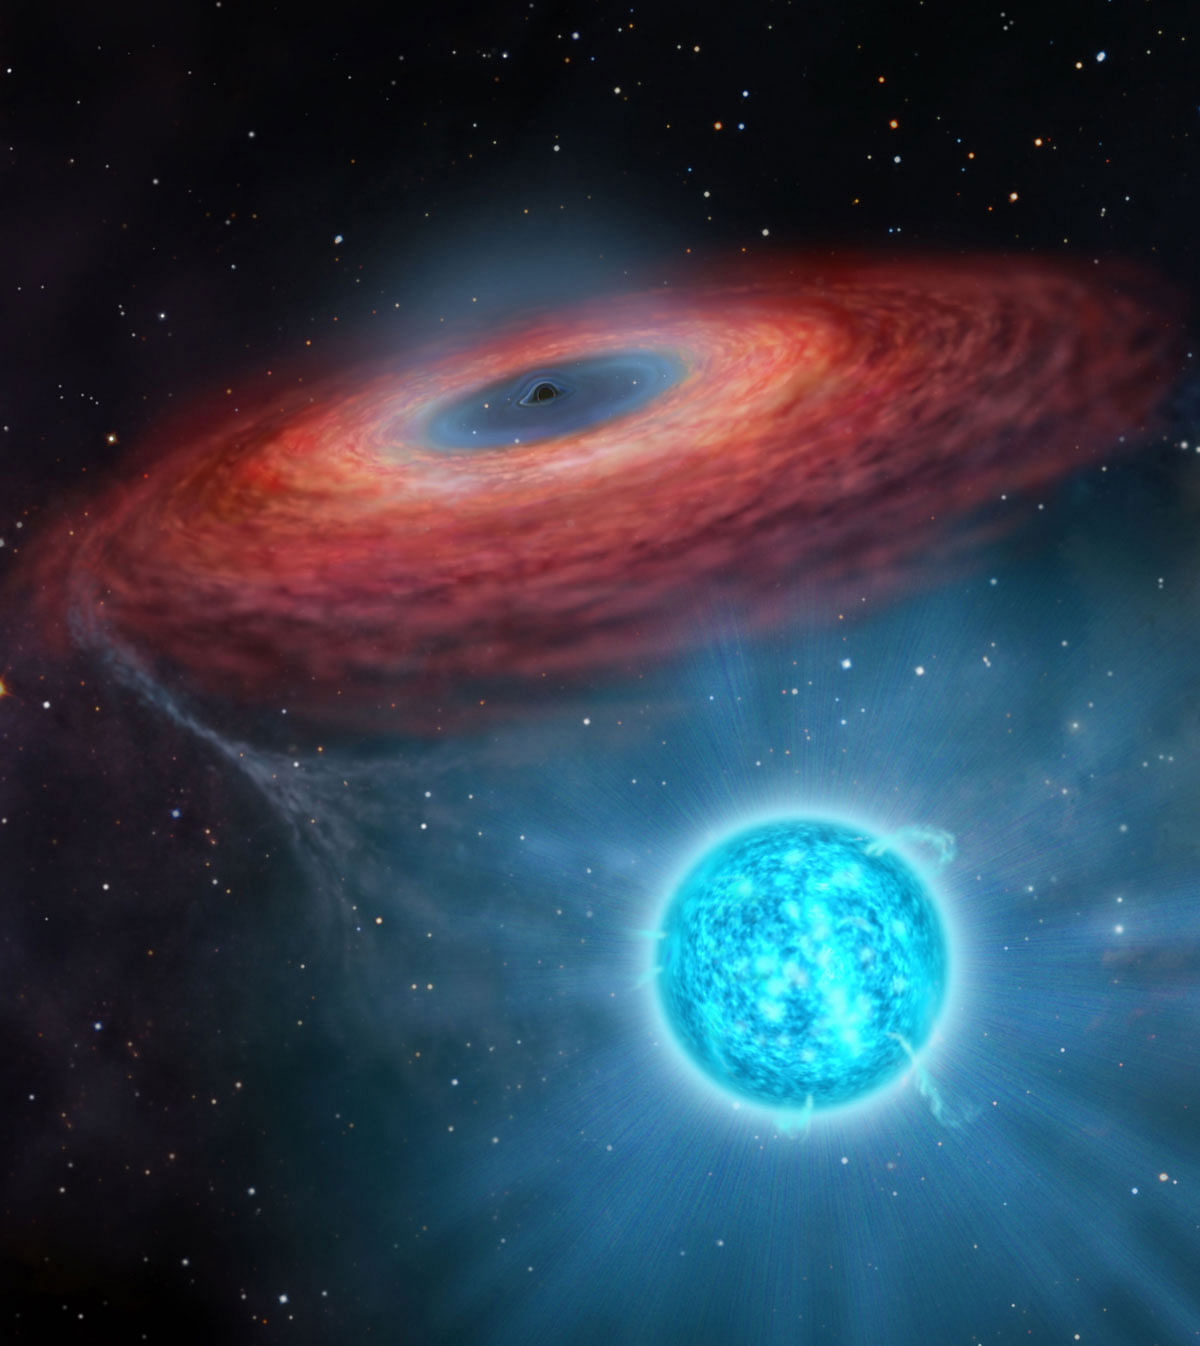 This handout received from the Beijing Planetarium via the China Academy of Sciences on 26 November 2019 shows a rendering by artist Yu Jingchuan of the accretion of gas onto a stellar black hole from its blue companion star, through a truncated accretion disk. Astronomers have discovered a black hole in the Milky Way so huge that it challenges existing models of how stars evolve, researchers announced on 28 November. Photo: AFP